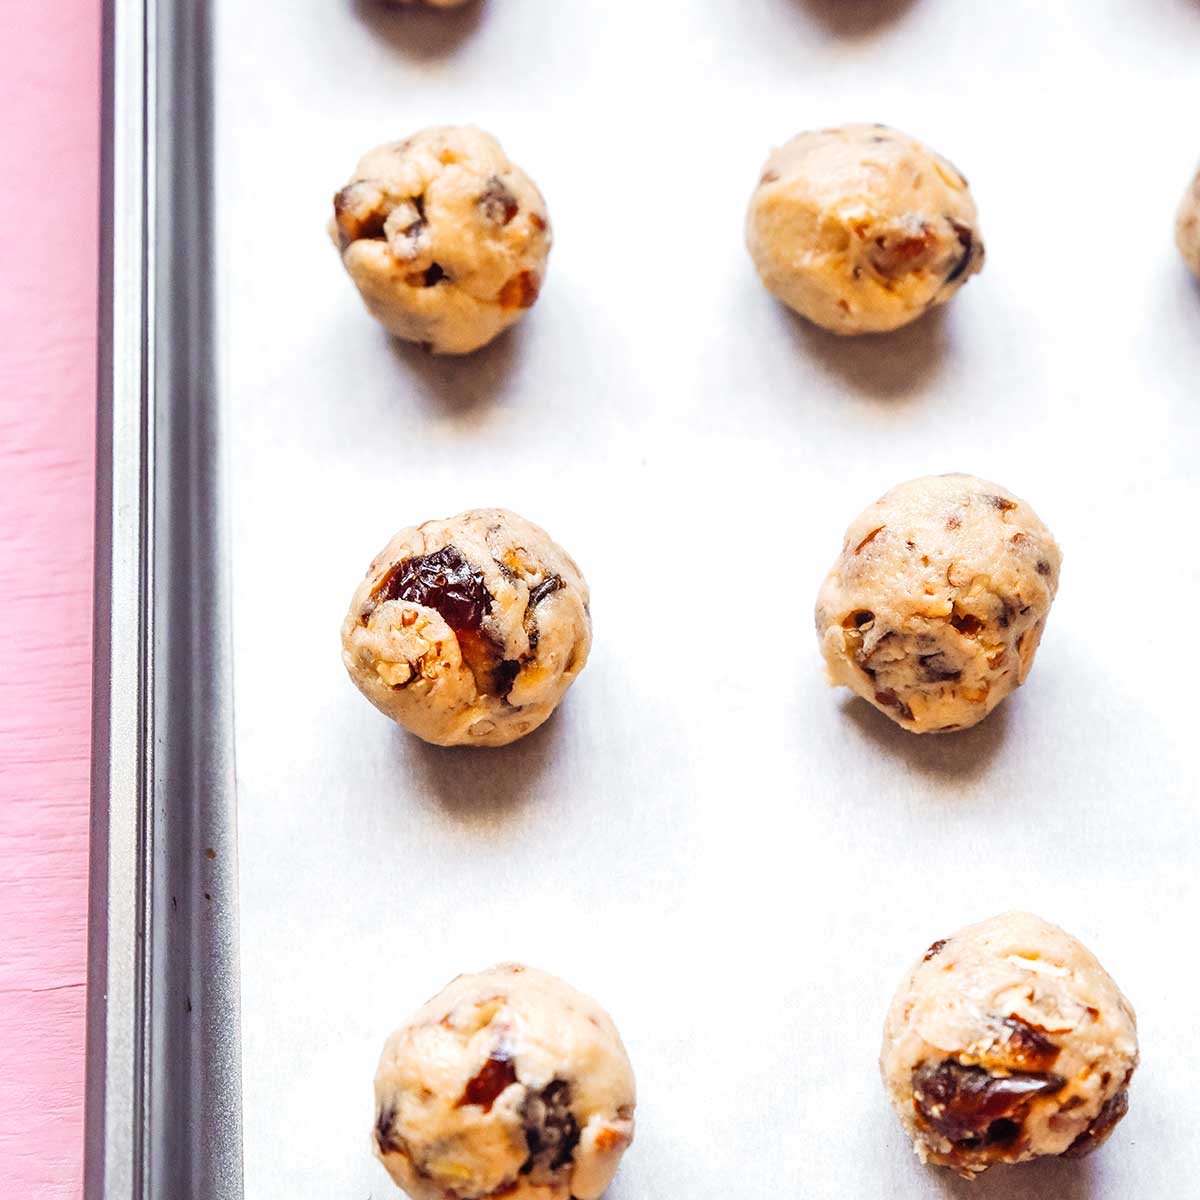 Rolled balls of chewy date cookies on a parchment-lined baking sheet ready to go in the oven